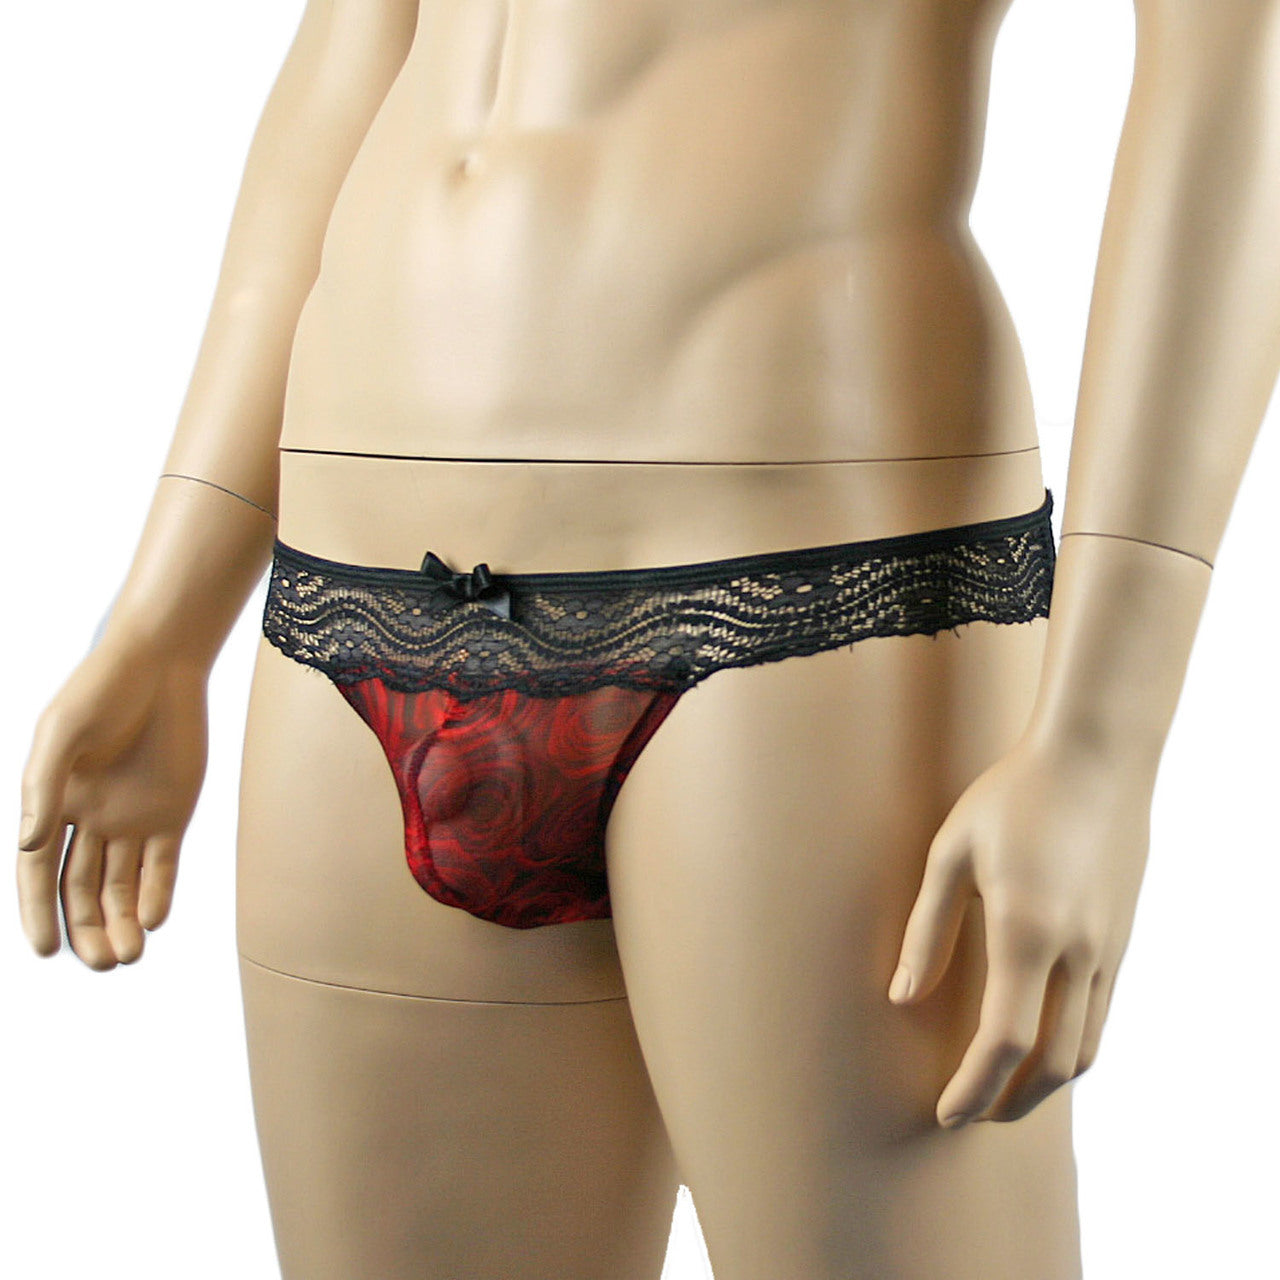 Mens Roses Bikini Brief, Sexy Sheer Lingerie Underwear Red and Black Lace